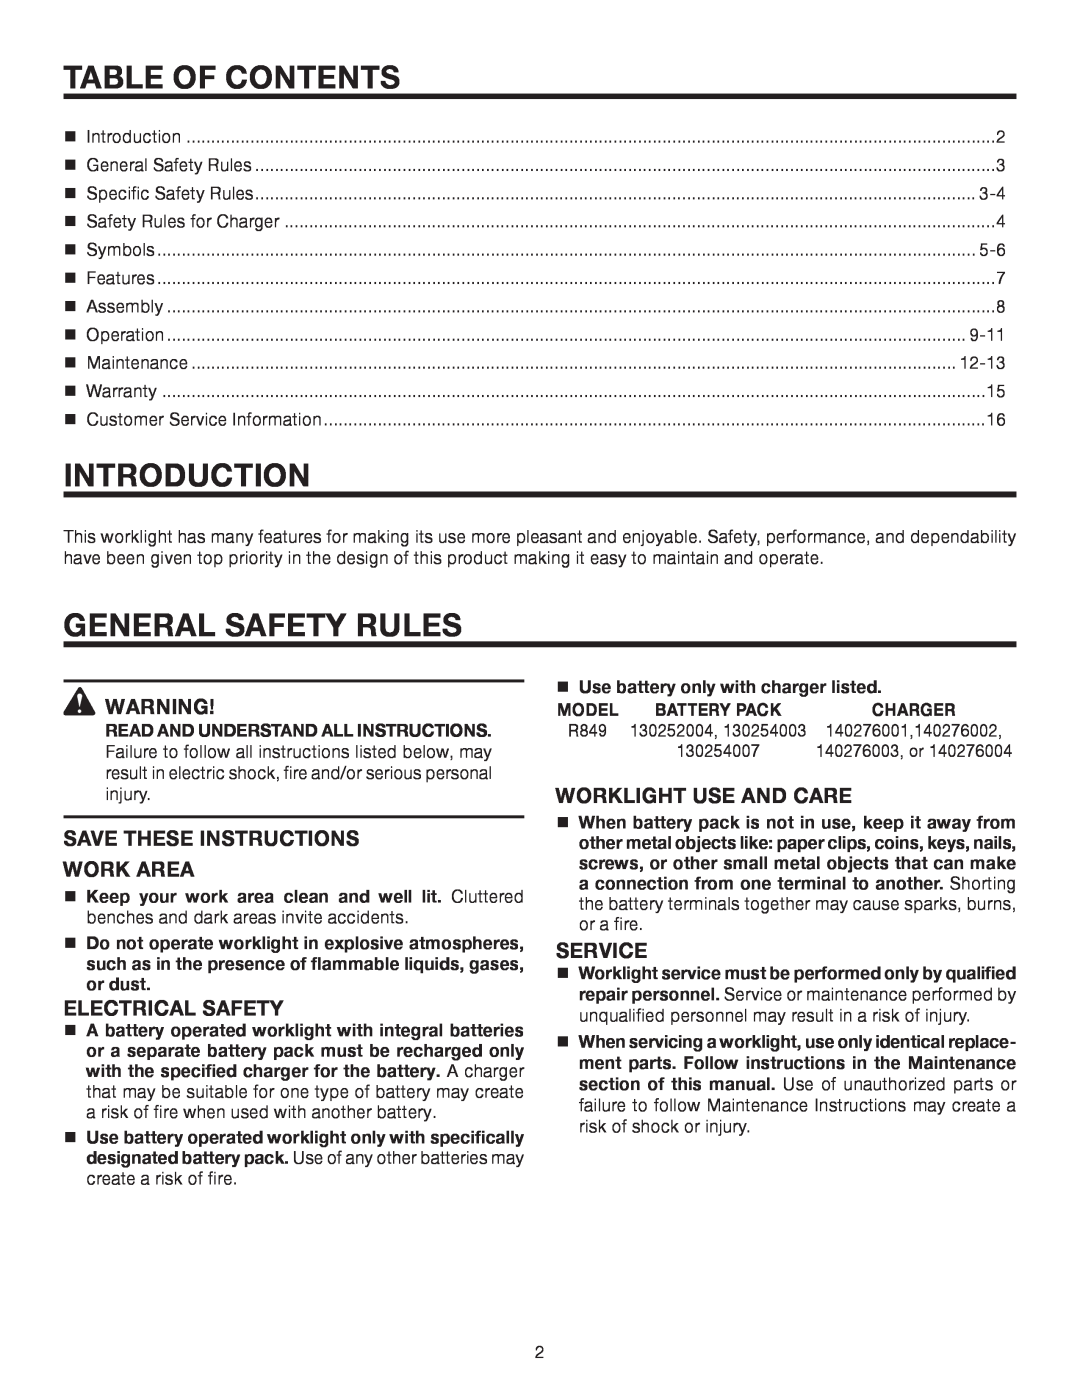 RIDGID R849 Table Of Contents, Introduction, General Safety Rules, Save These Instructions Work Area, Electrical Safety 